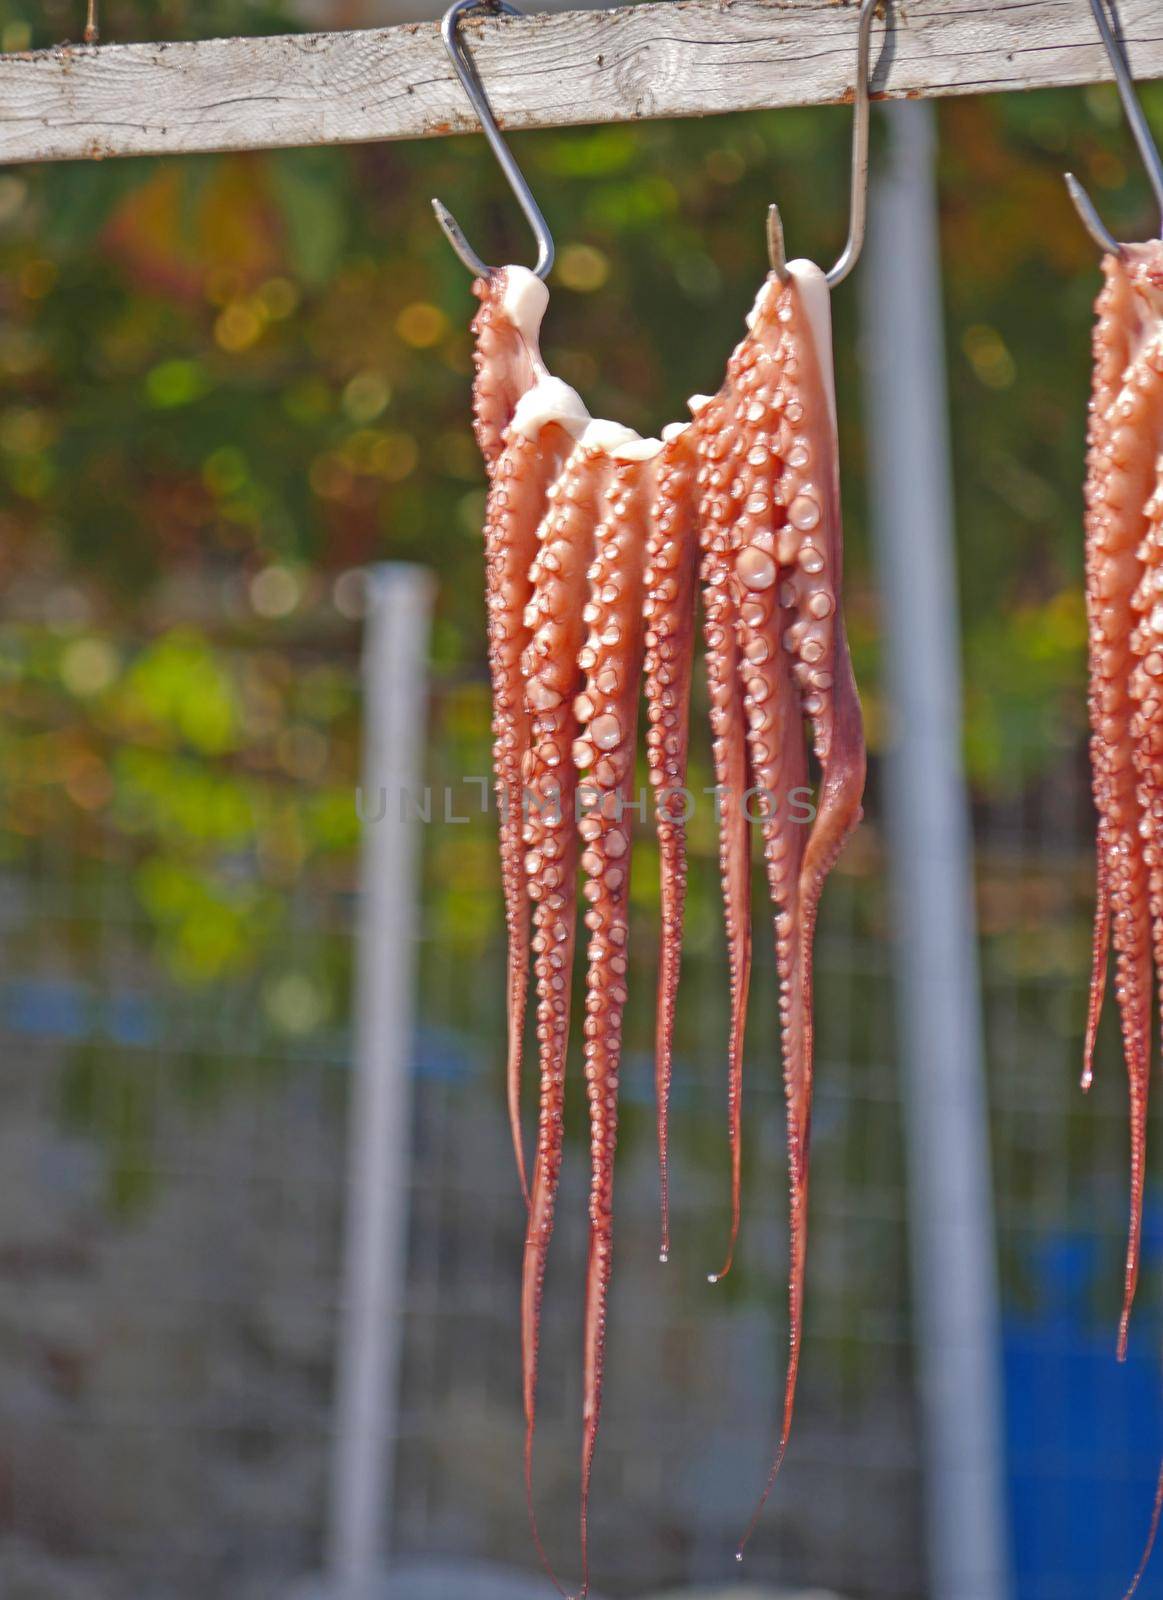 Octopus drying on a rope by alex_nako